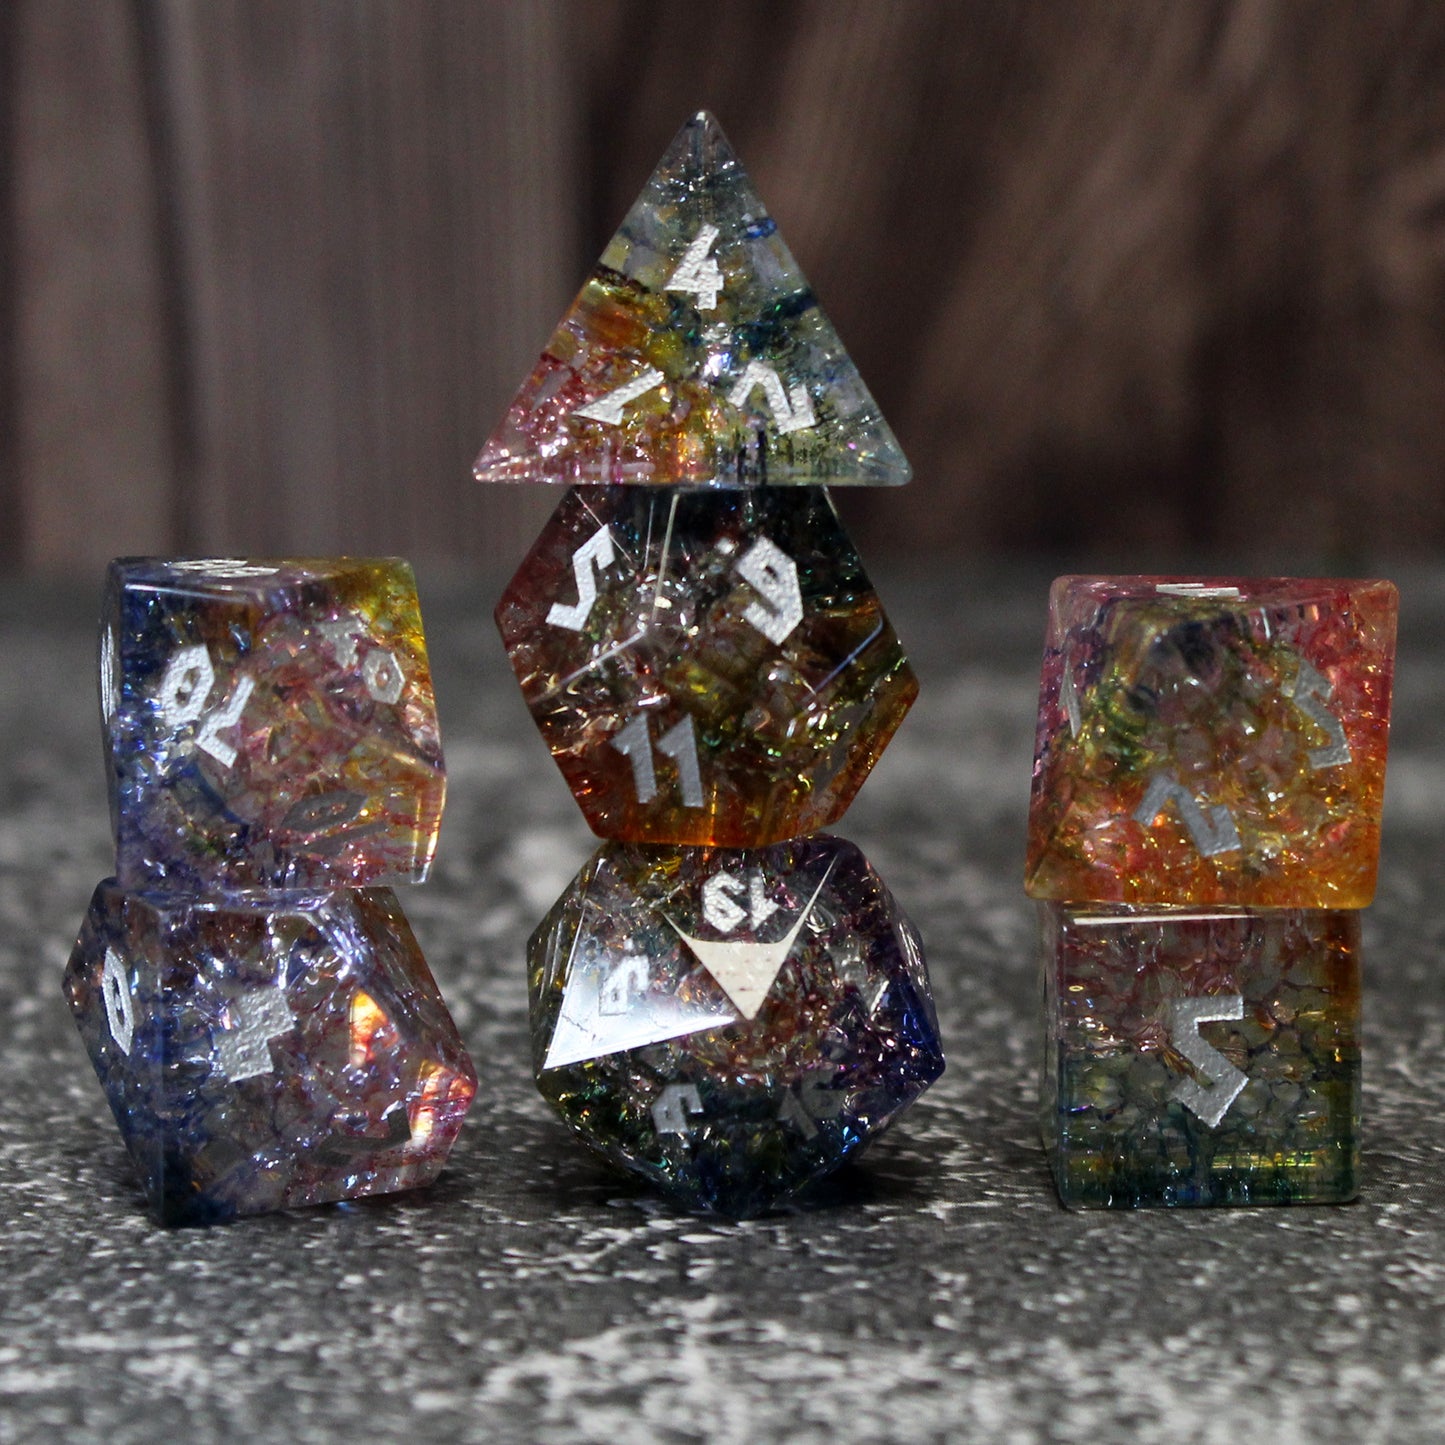 Frost Bound Frozen Rainbow Shattered Glass Dice Set